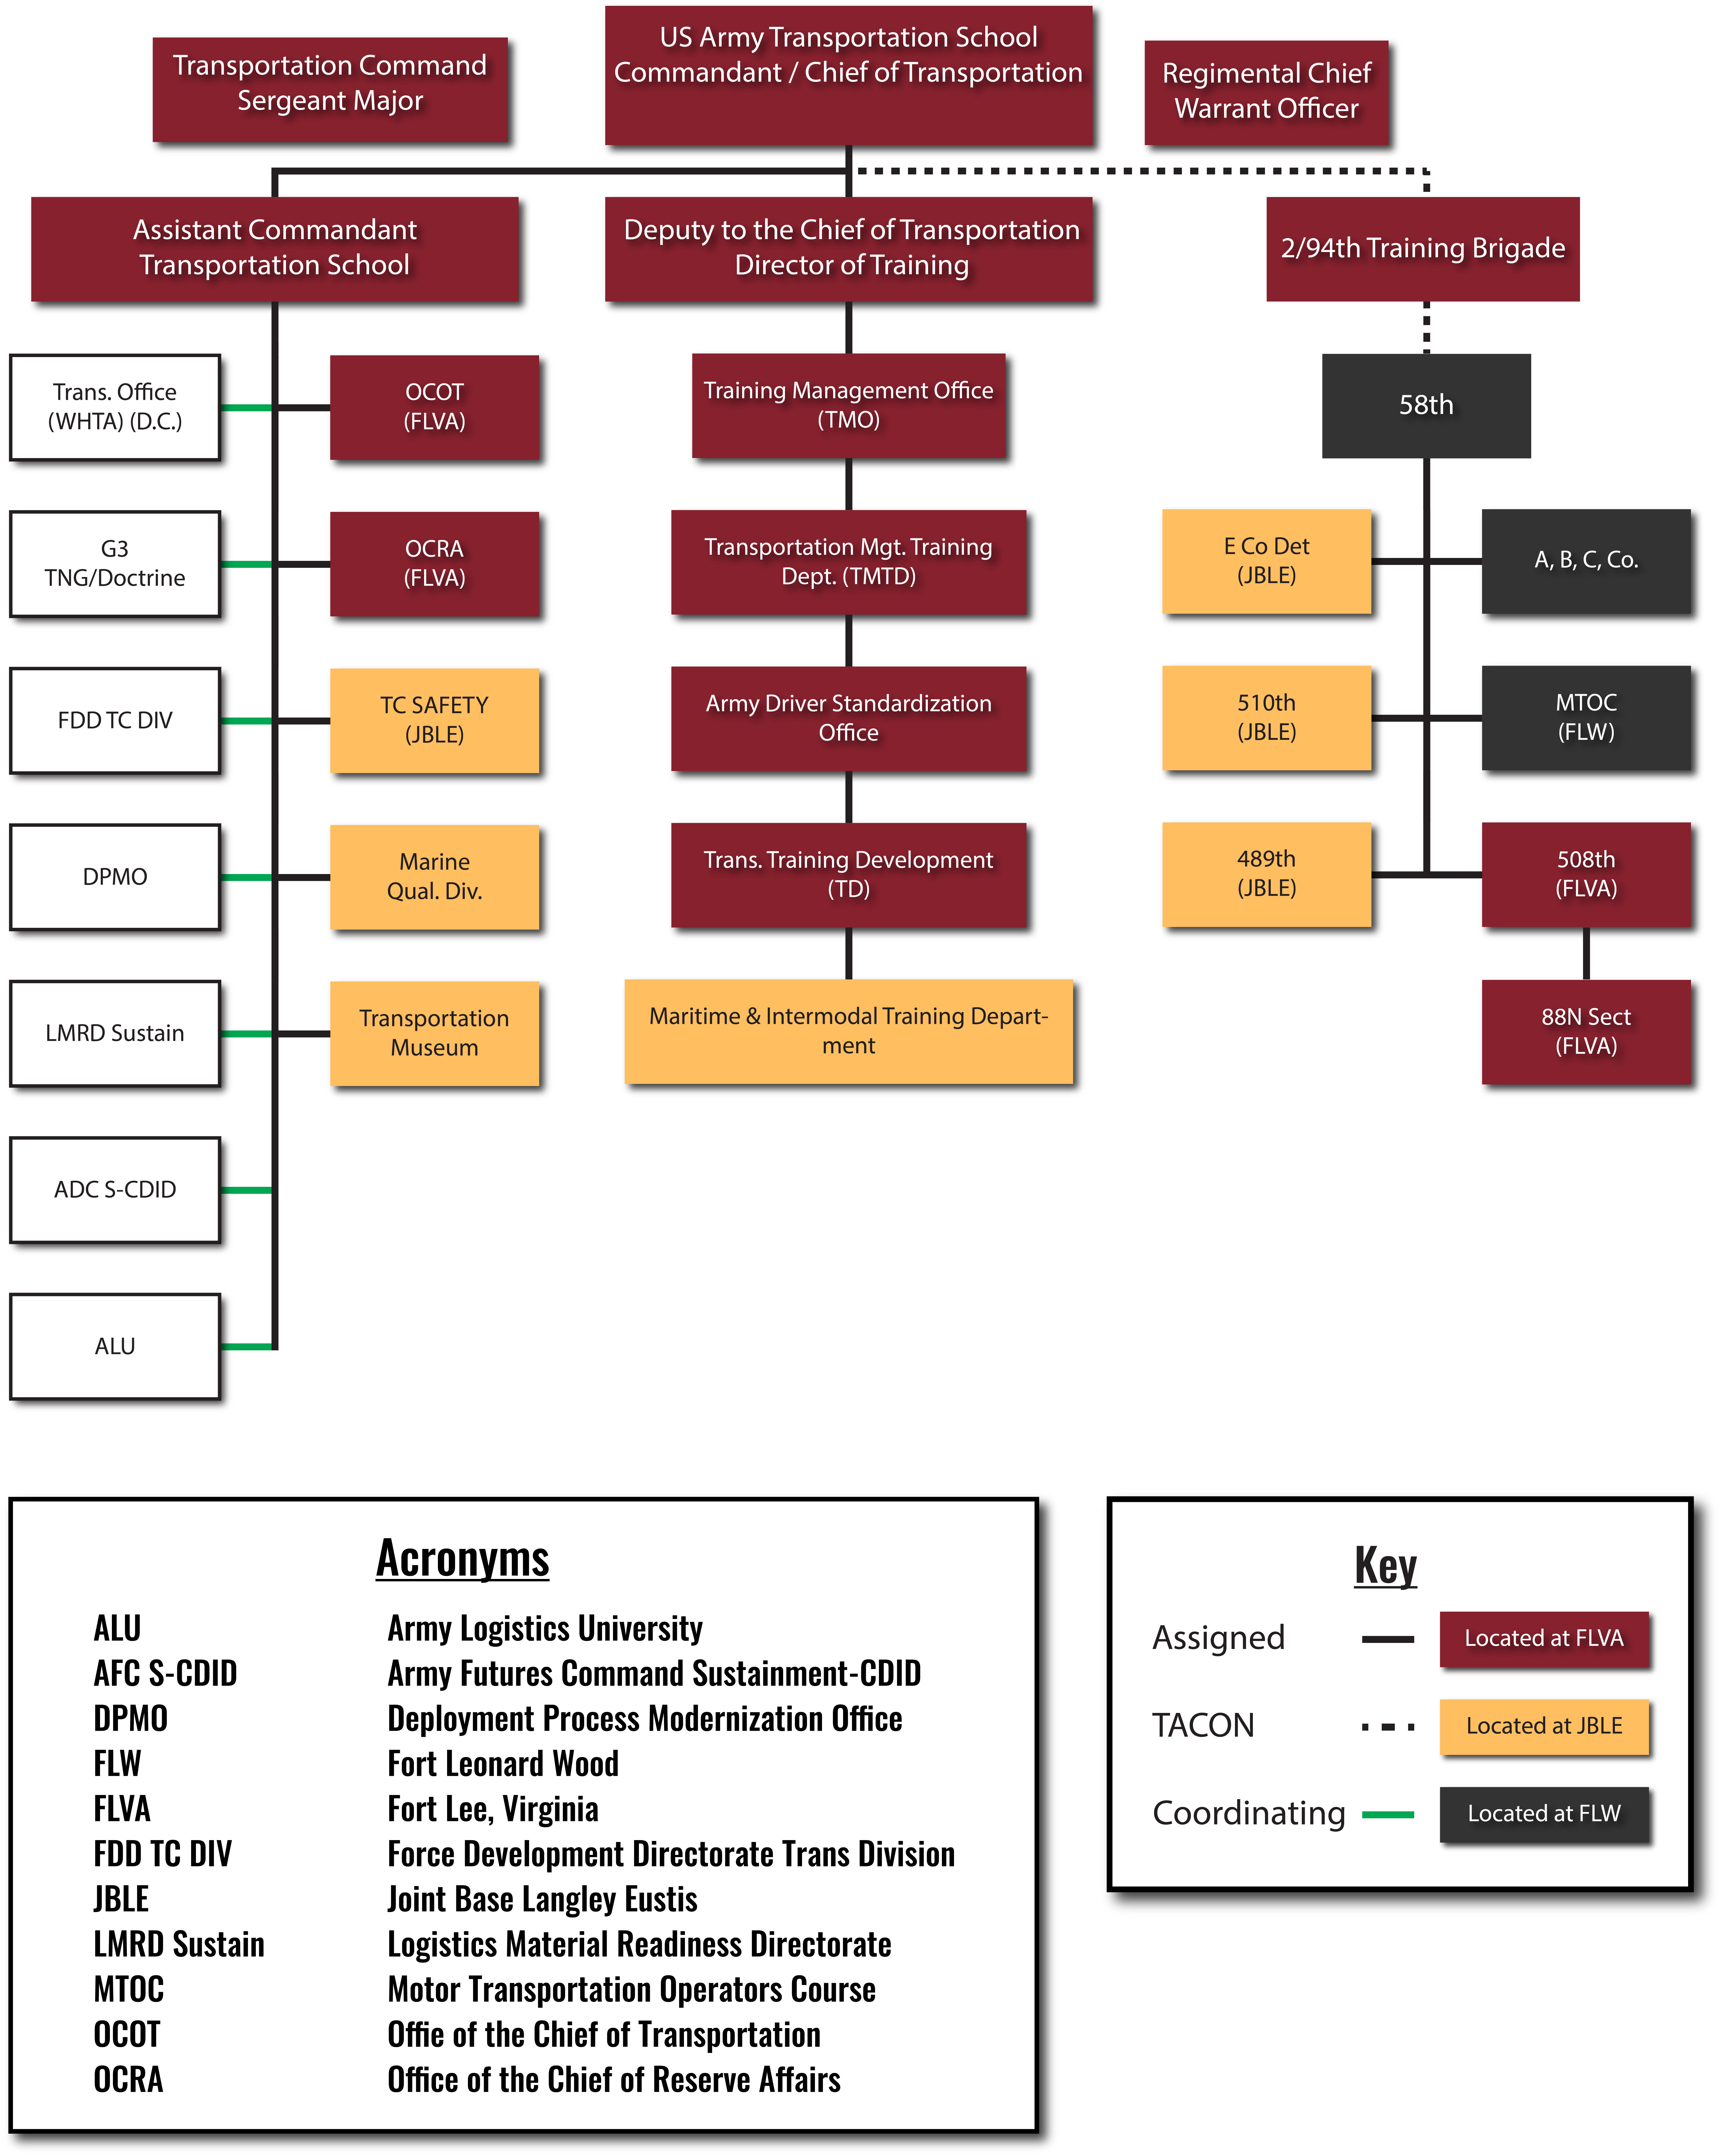 Organizational chart for the Transportation Corps and Transportation School.